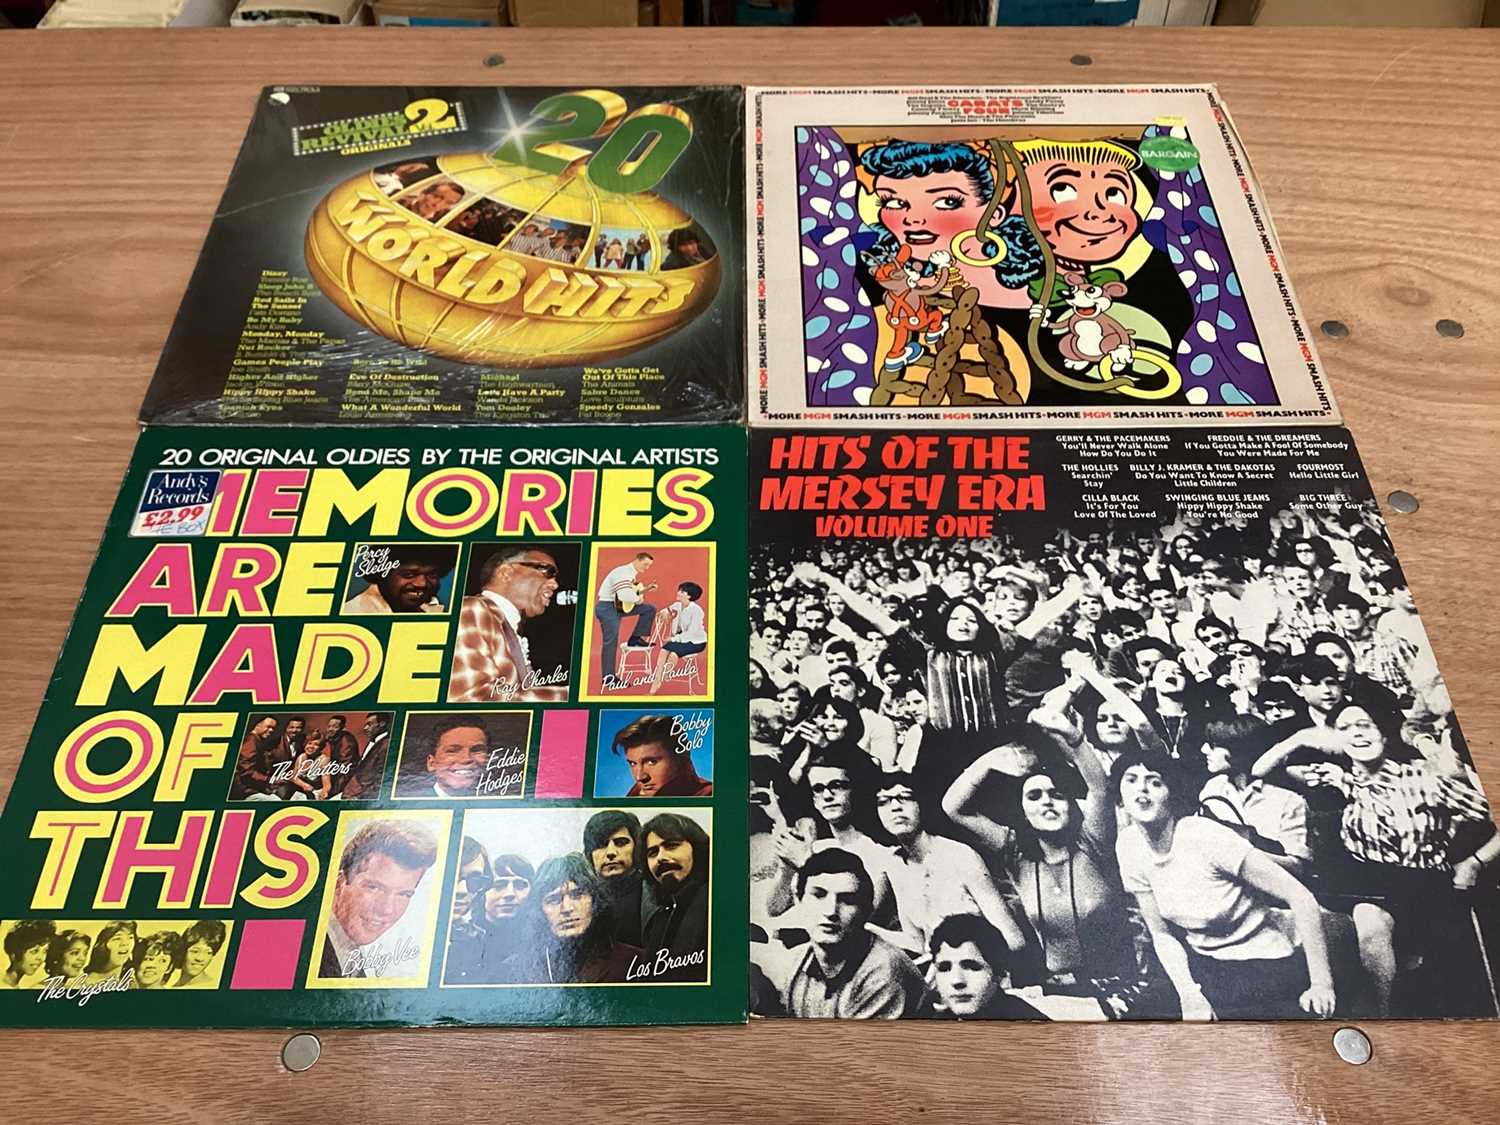 Box of LP records including Smokie, Slade, Shadows, Fergal Sharky and compilations - Image 20 of 38